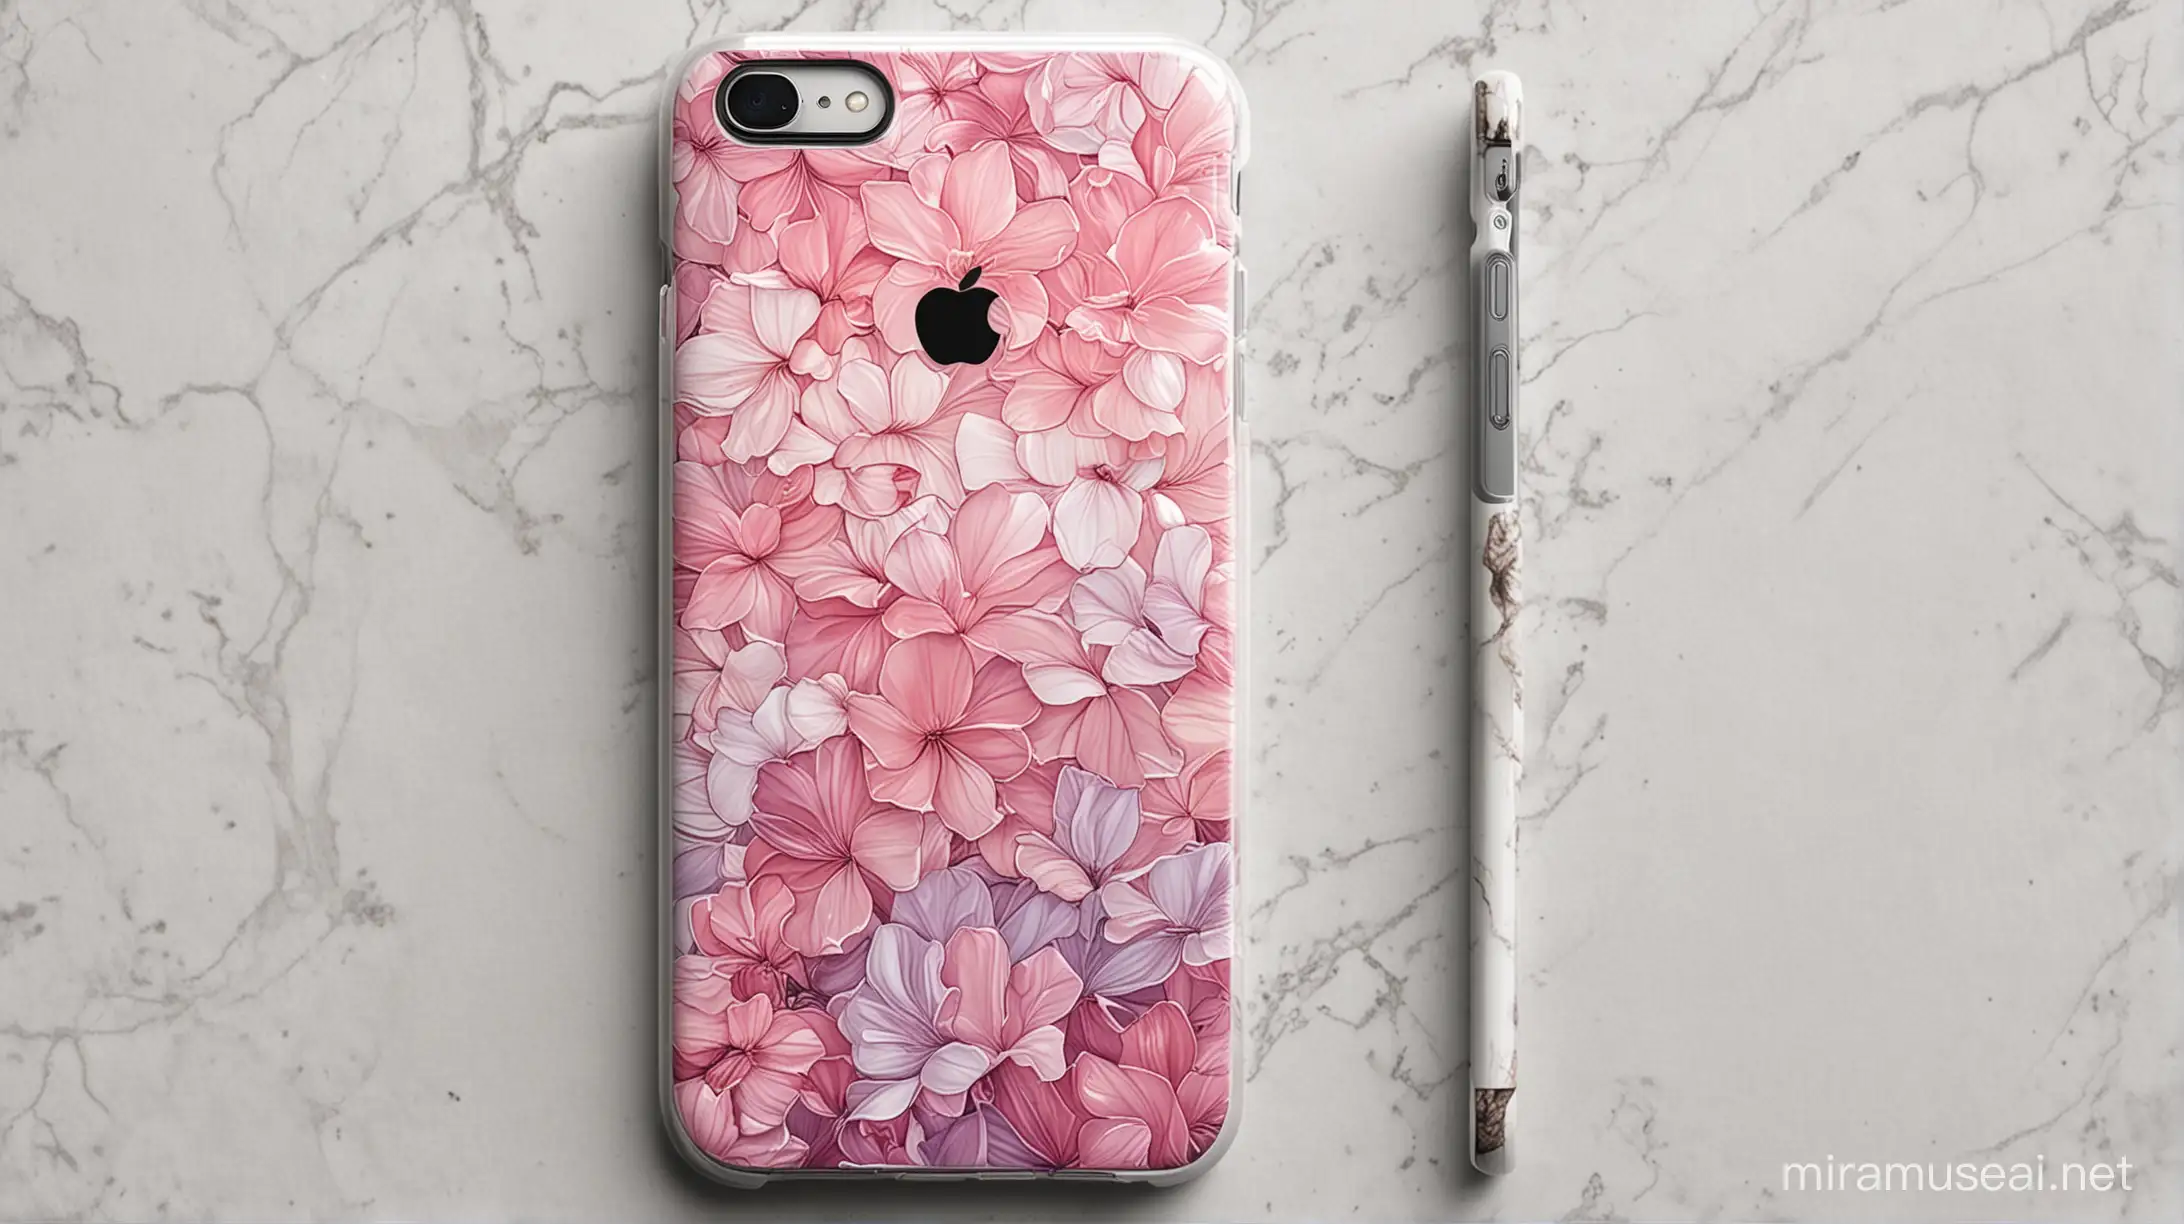 Stylish Floral Patterned Phone Case with Glitter Accents